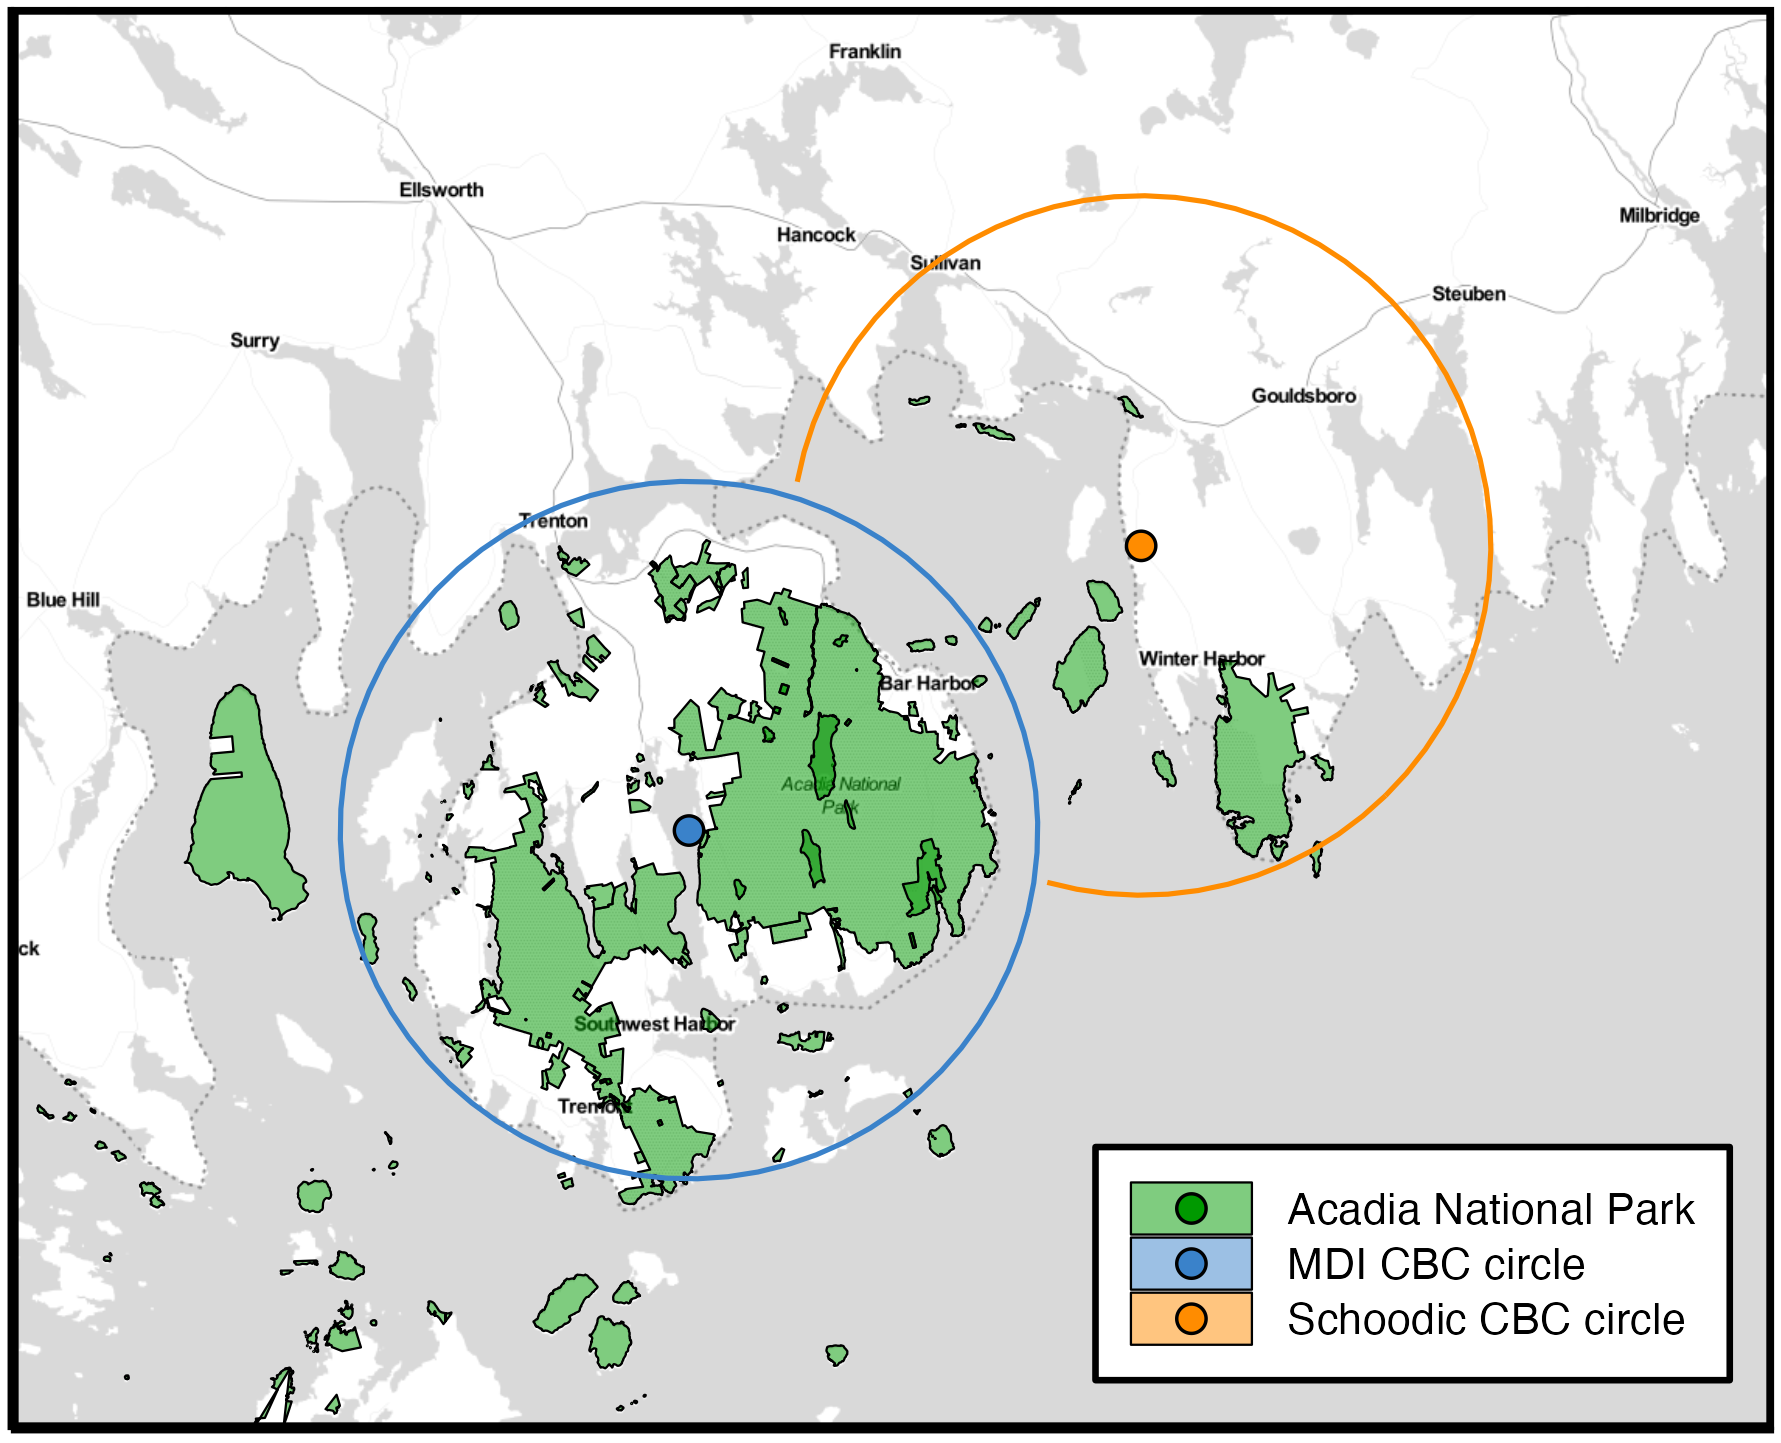 A map of the two Christmas Bird Count circles used in this study. The Mount Desert Island (MDI) circle is centered near Hall Quarry, Somes Sound and encompasses almost all of the island. The Schoodic Point circle is centered at the intersection of route 186 and the Summer Harbor Road in Gouldsboro, and encompasses the entire Schoodic Peninsula. Acadia National Park lands are also displayed and account for about 16 percent of the total area of the two circles.